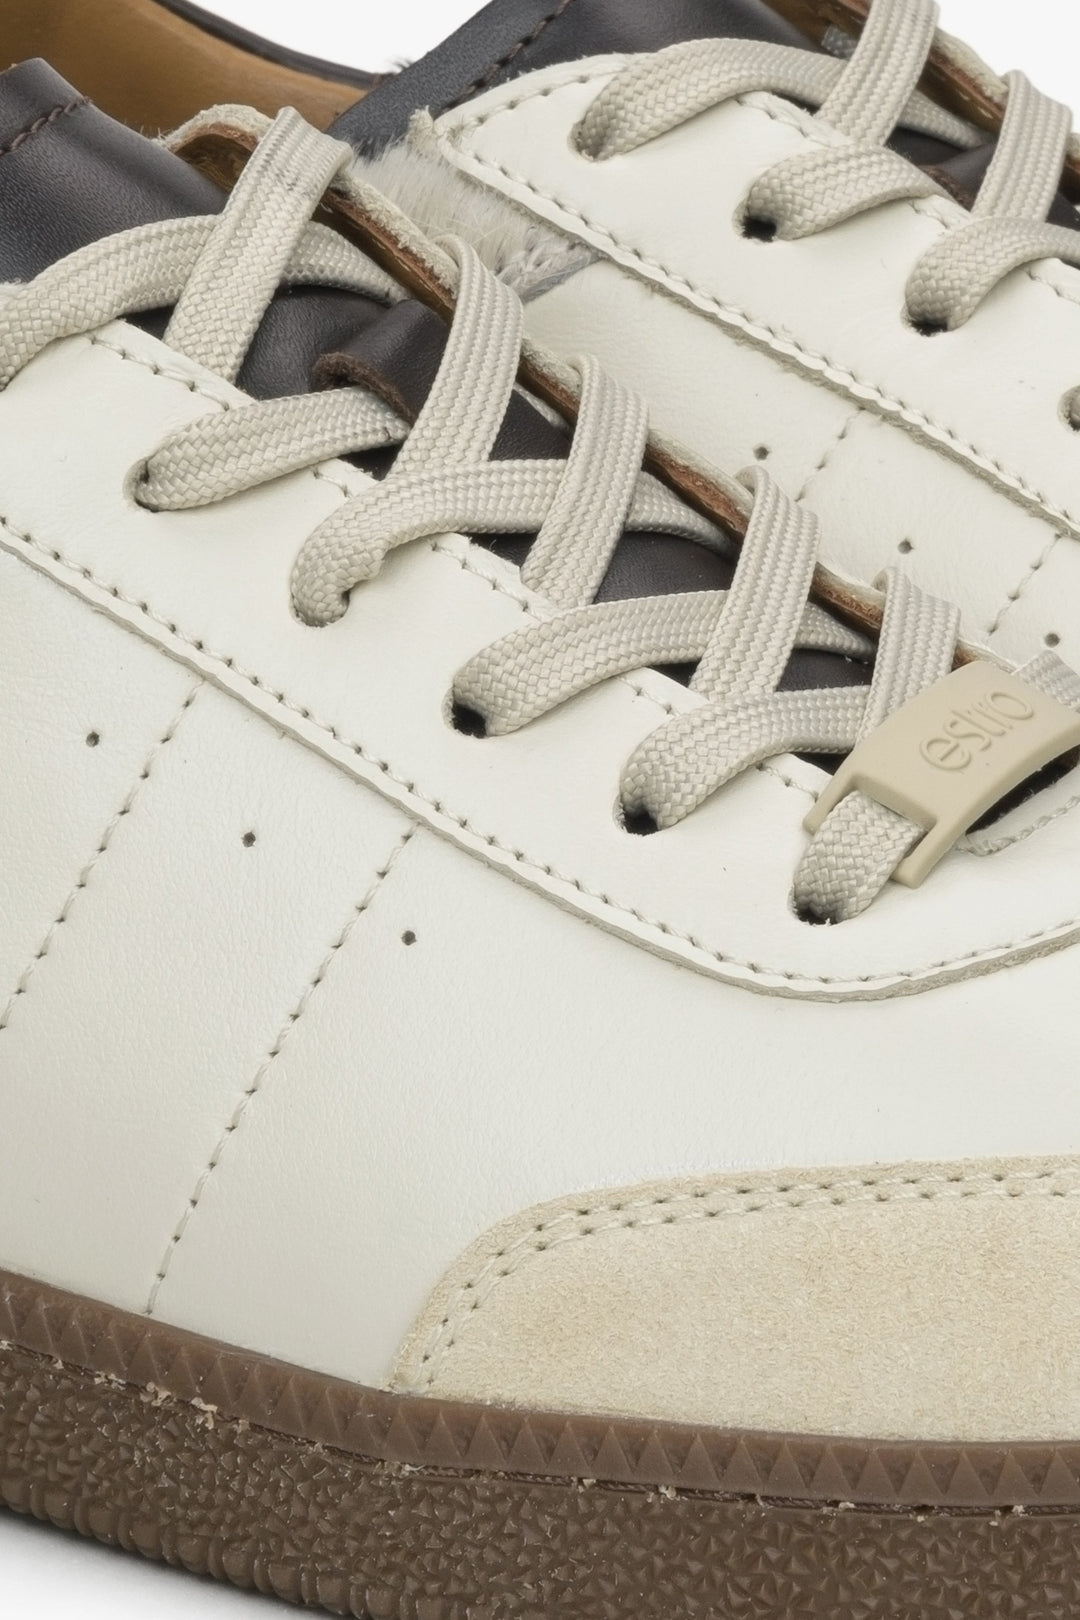 Estro leather women's beige sneakers - close-up of details.